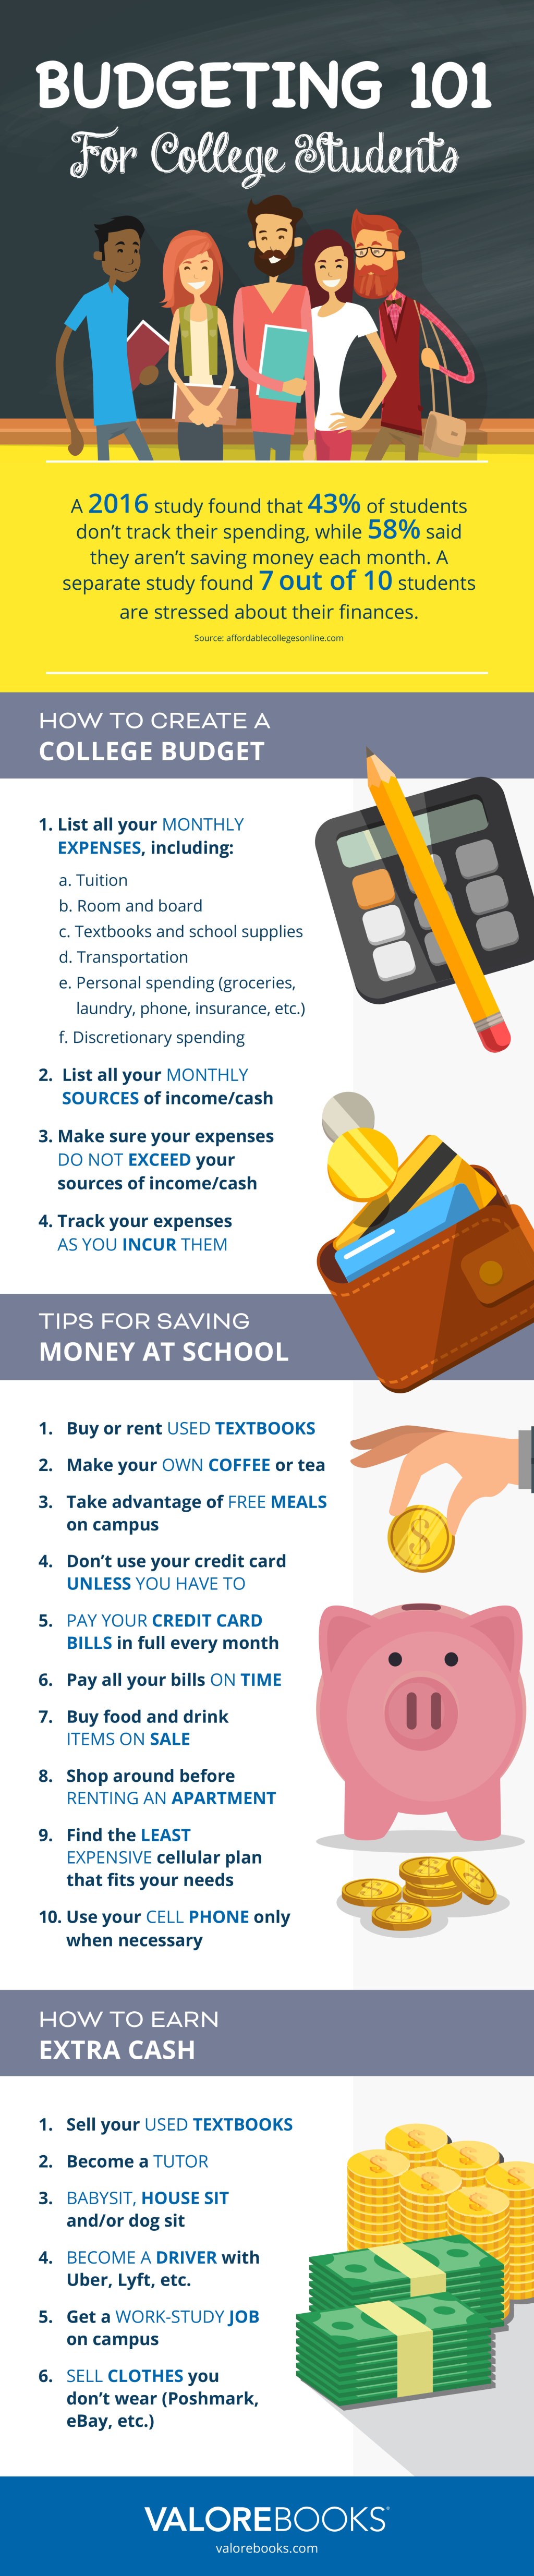 budgeting infographic saving money in college